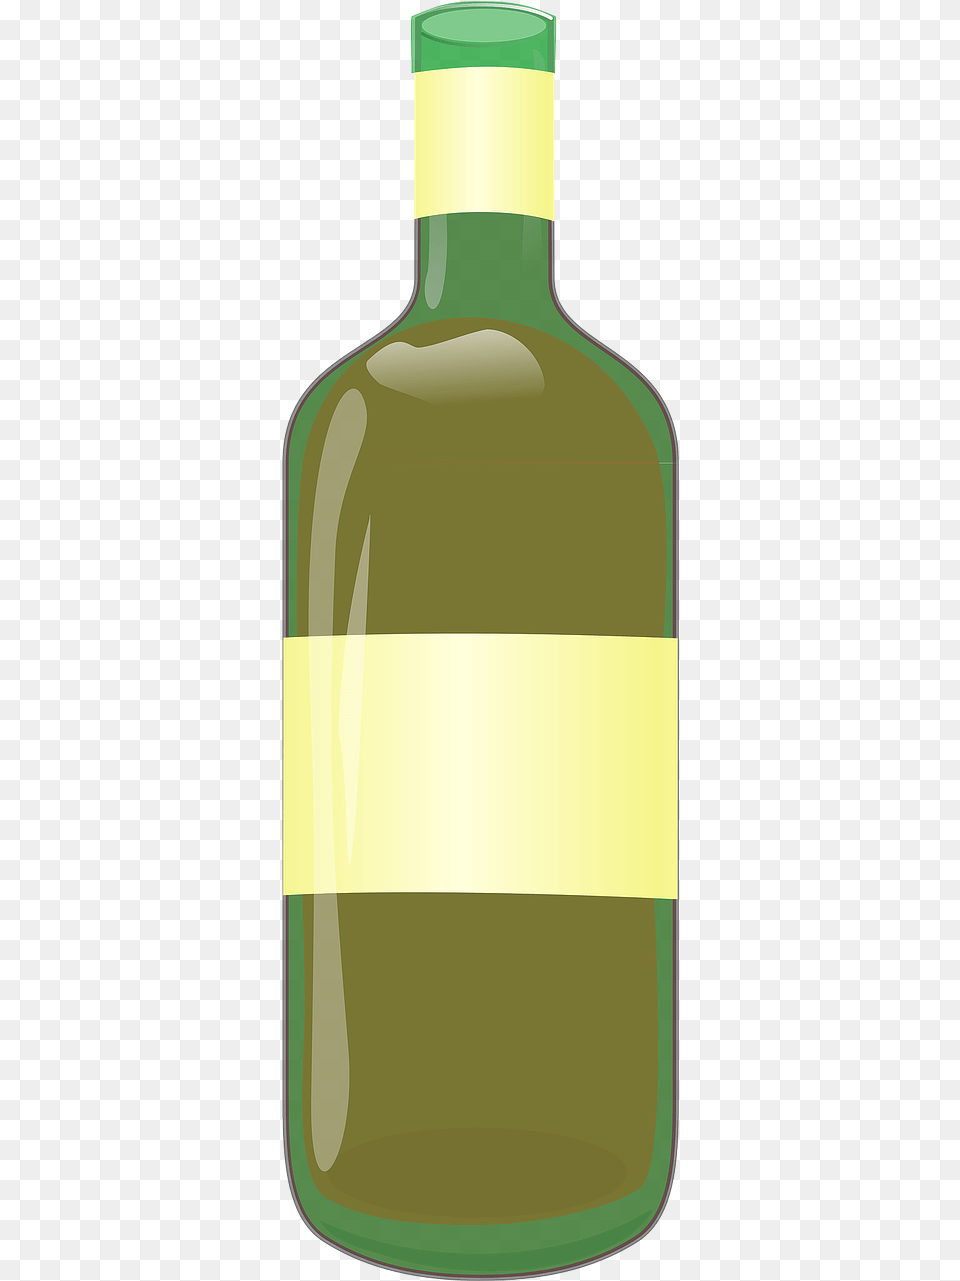 Liquor Bottle Green Free Picture Cheese And Wine Cartoon, Alcohol, Beverage, Wine Bottle Png Image